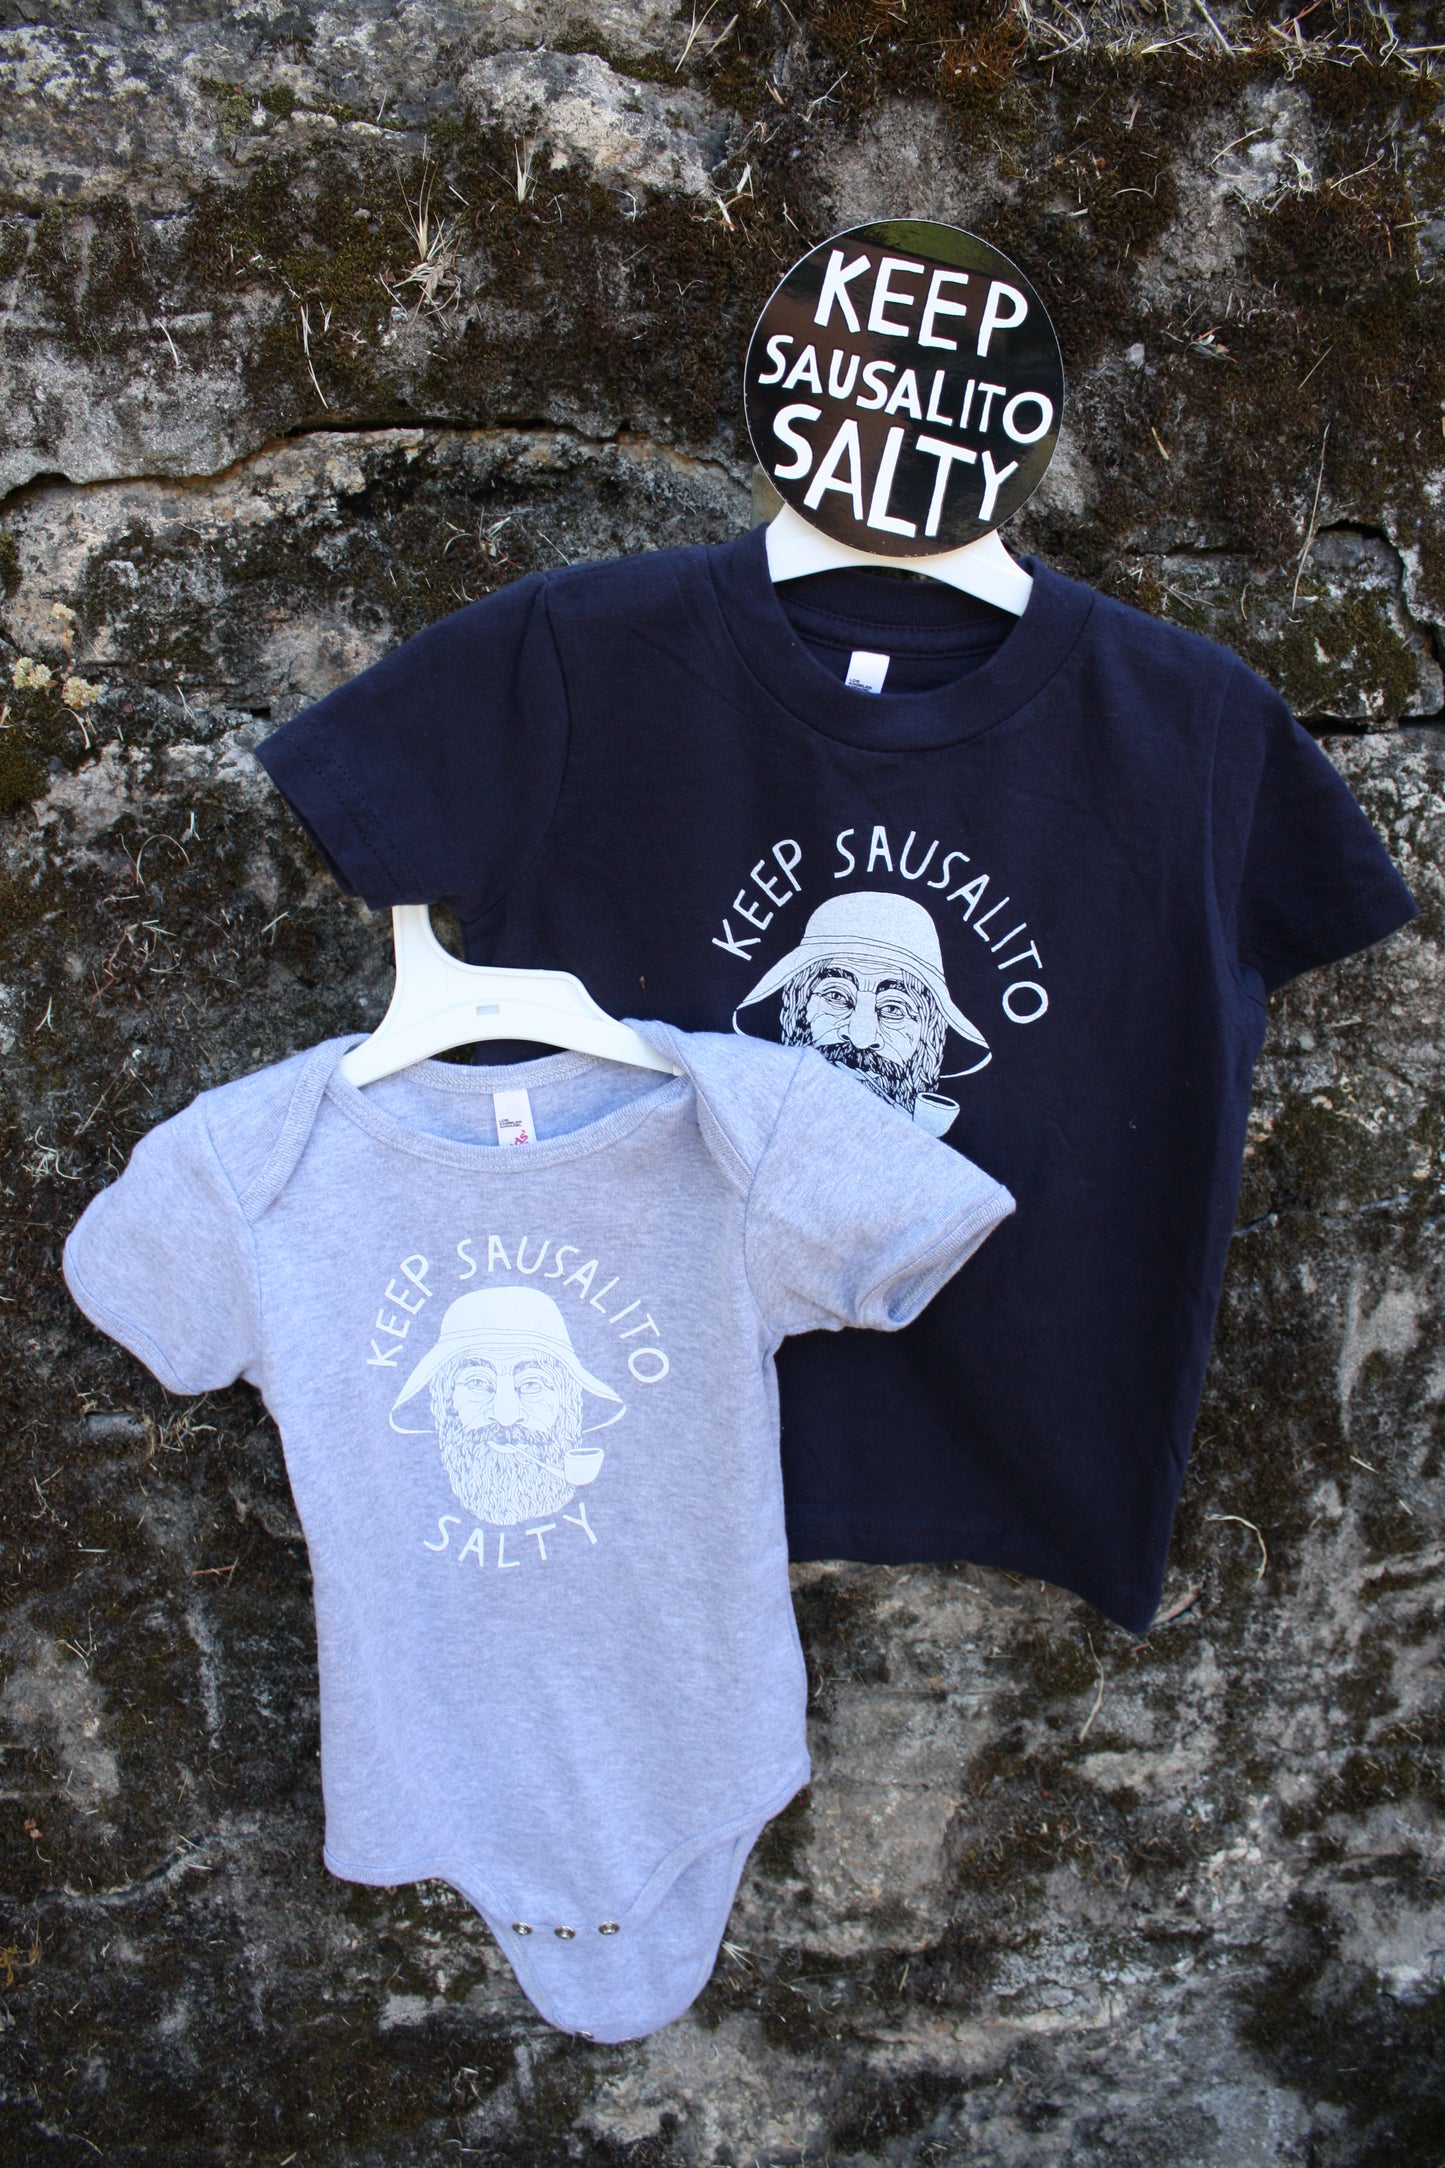 Keep Sausalito Salty: Navy Cotton T-Shirt / Kids 2T- Youth 10